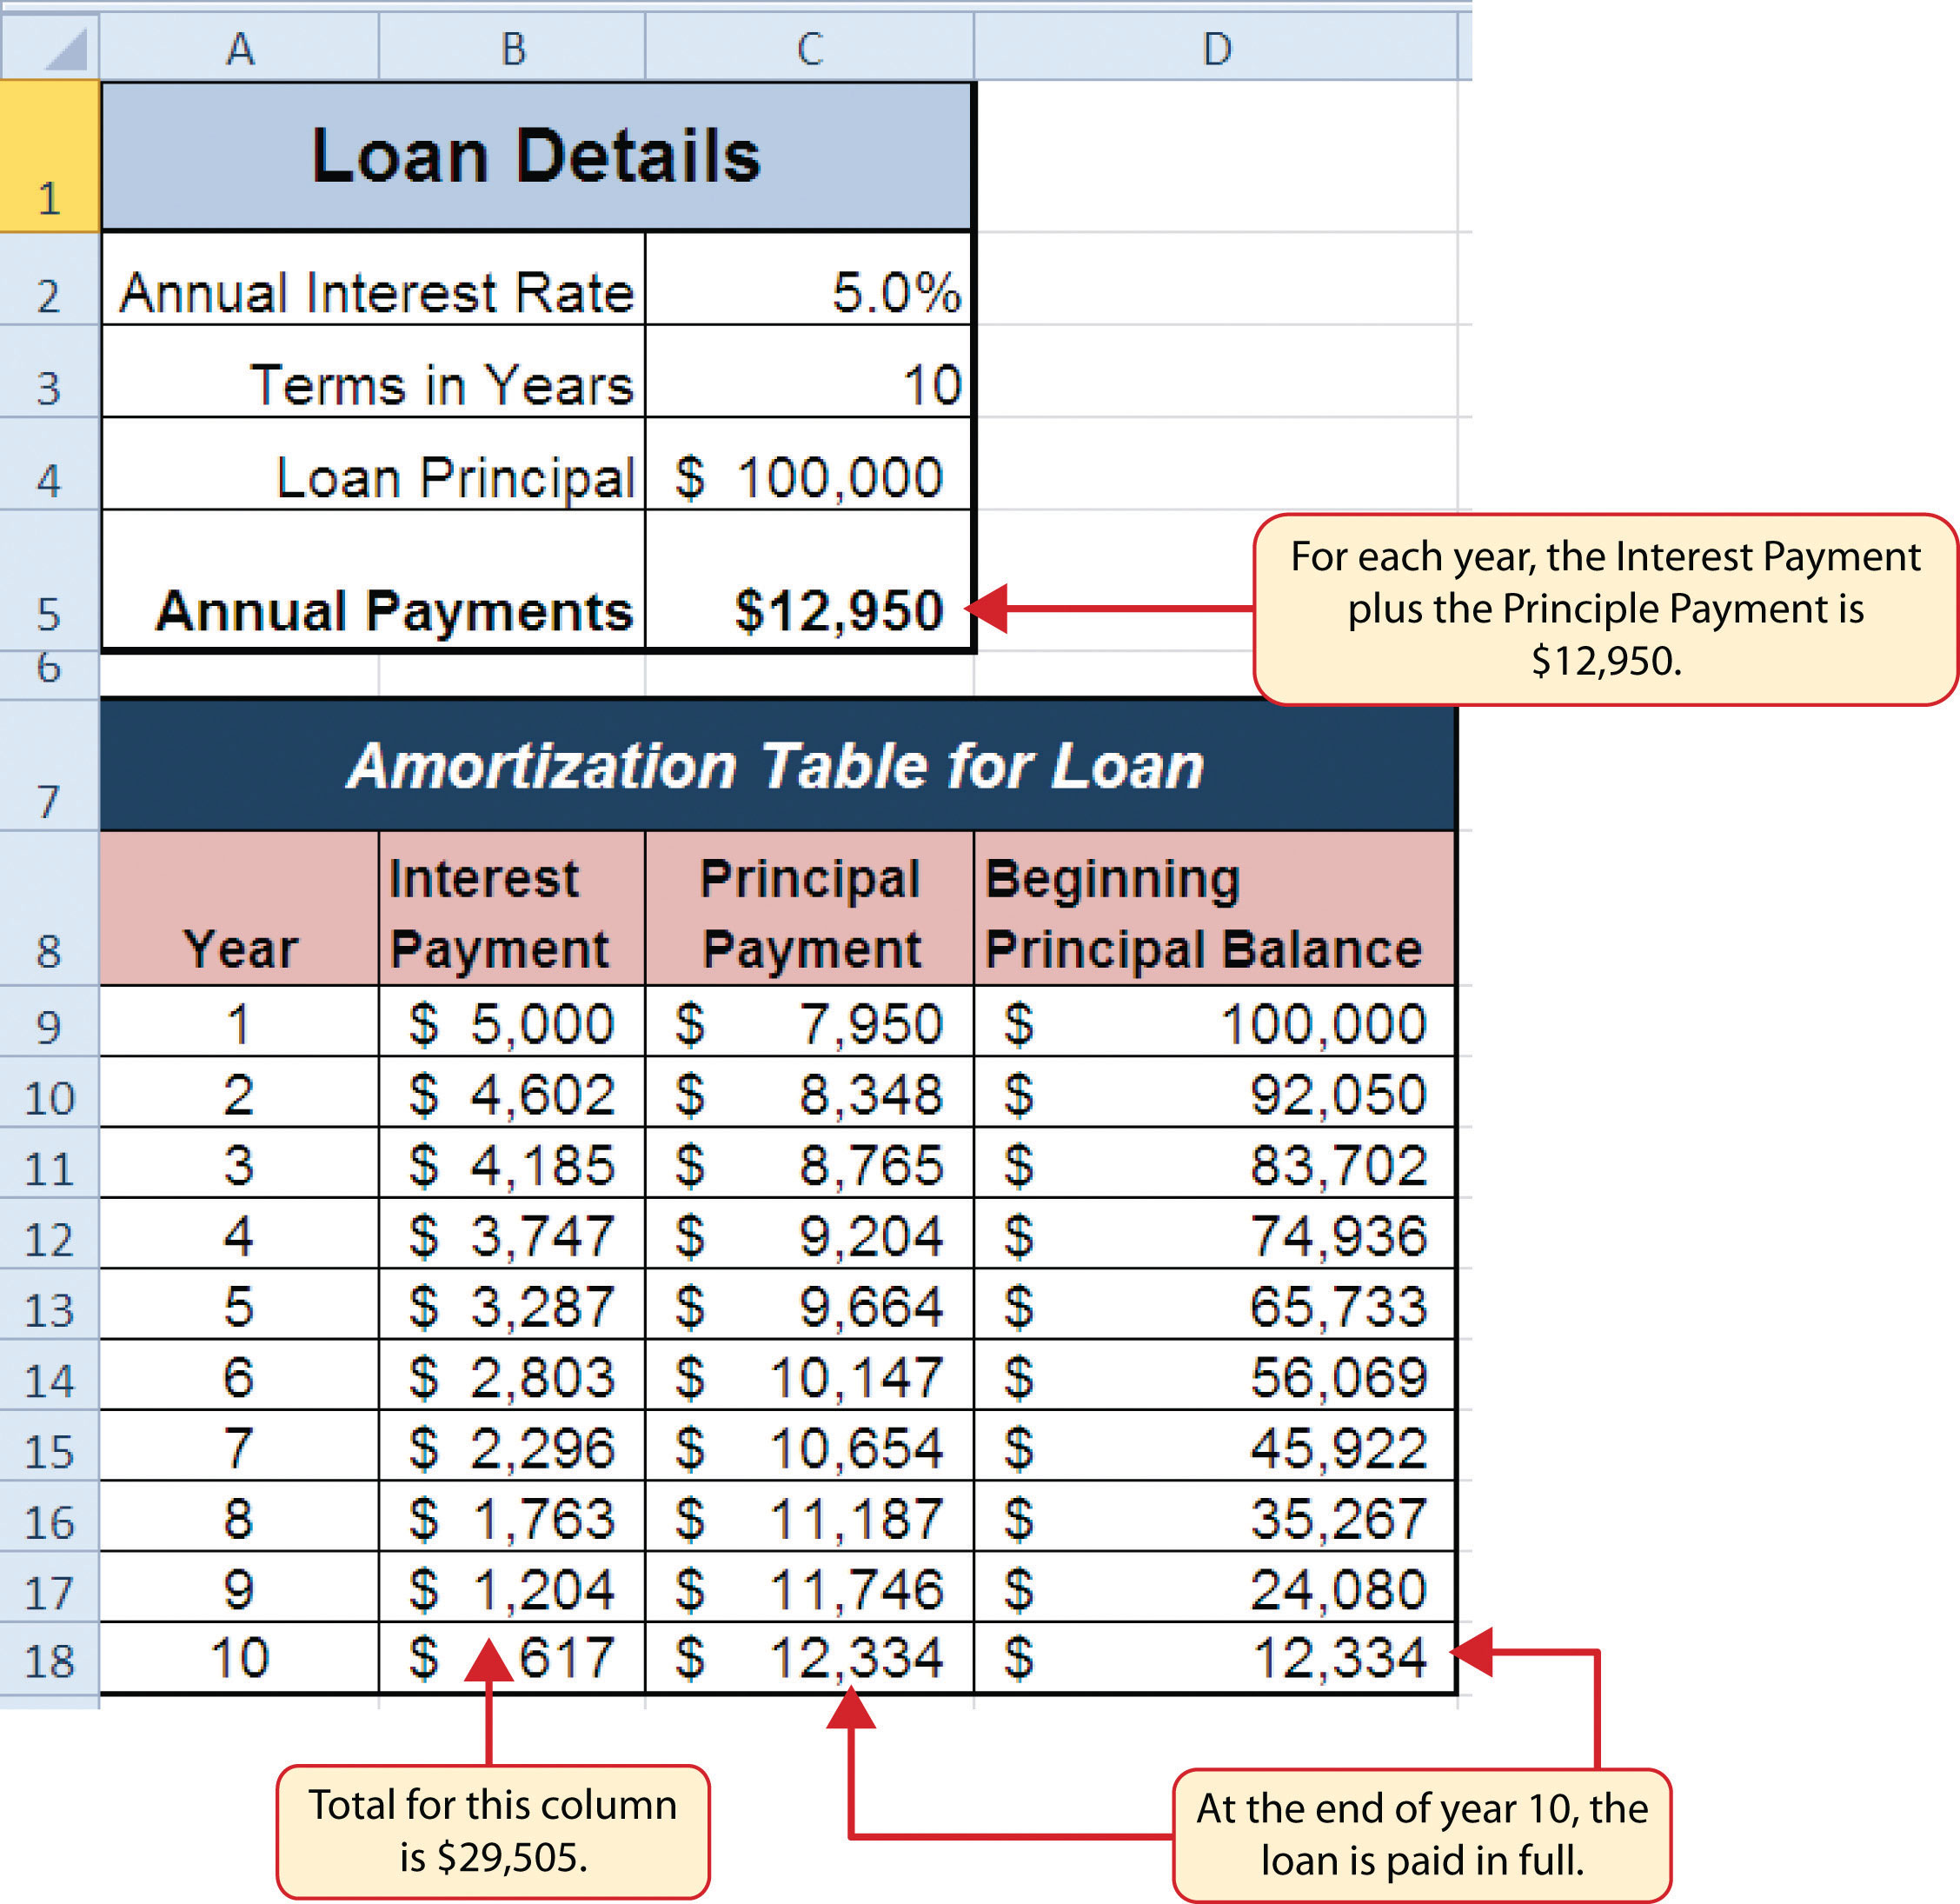 Where can you find an amortization table for a loan?